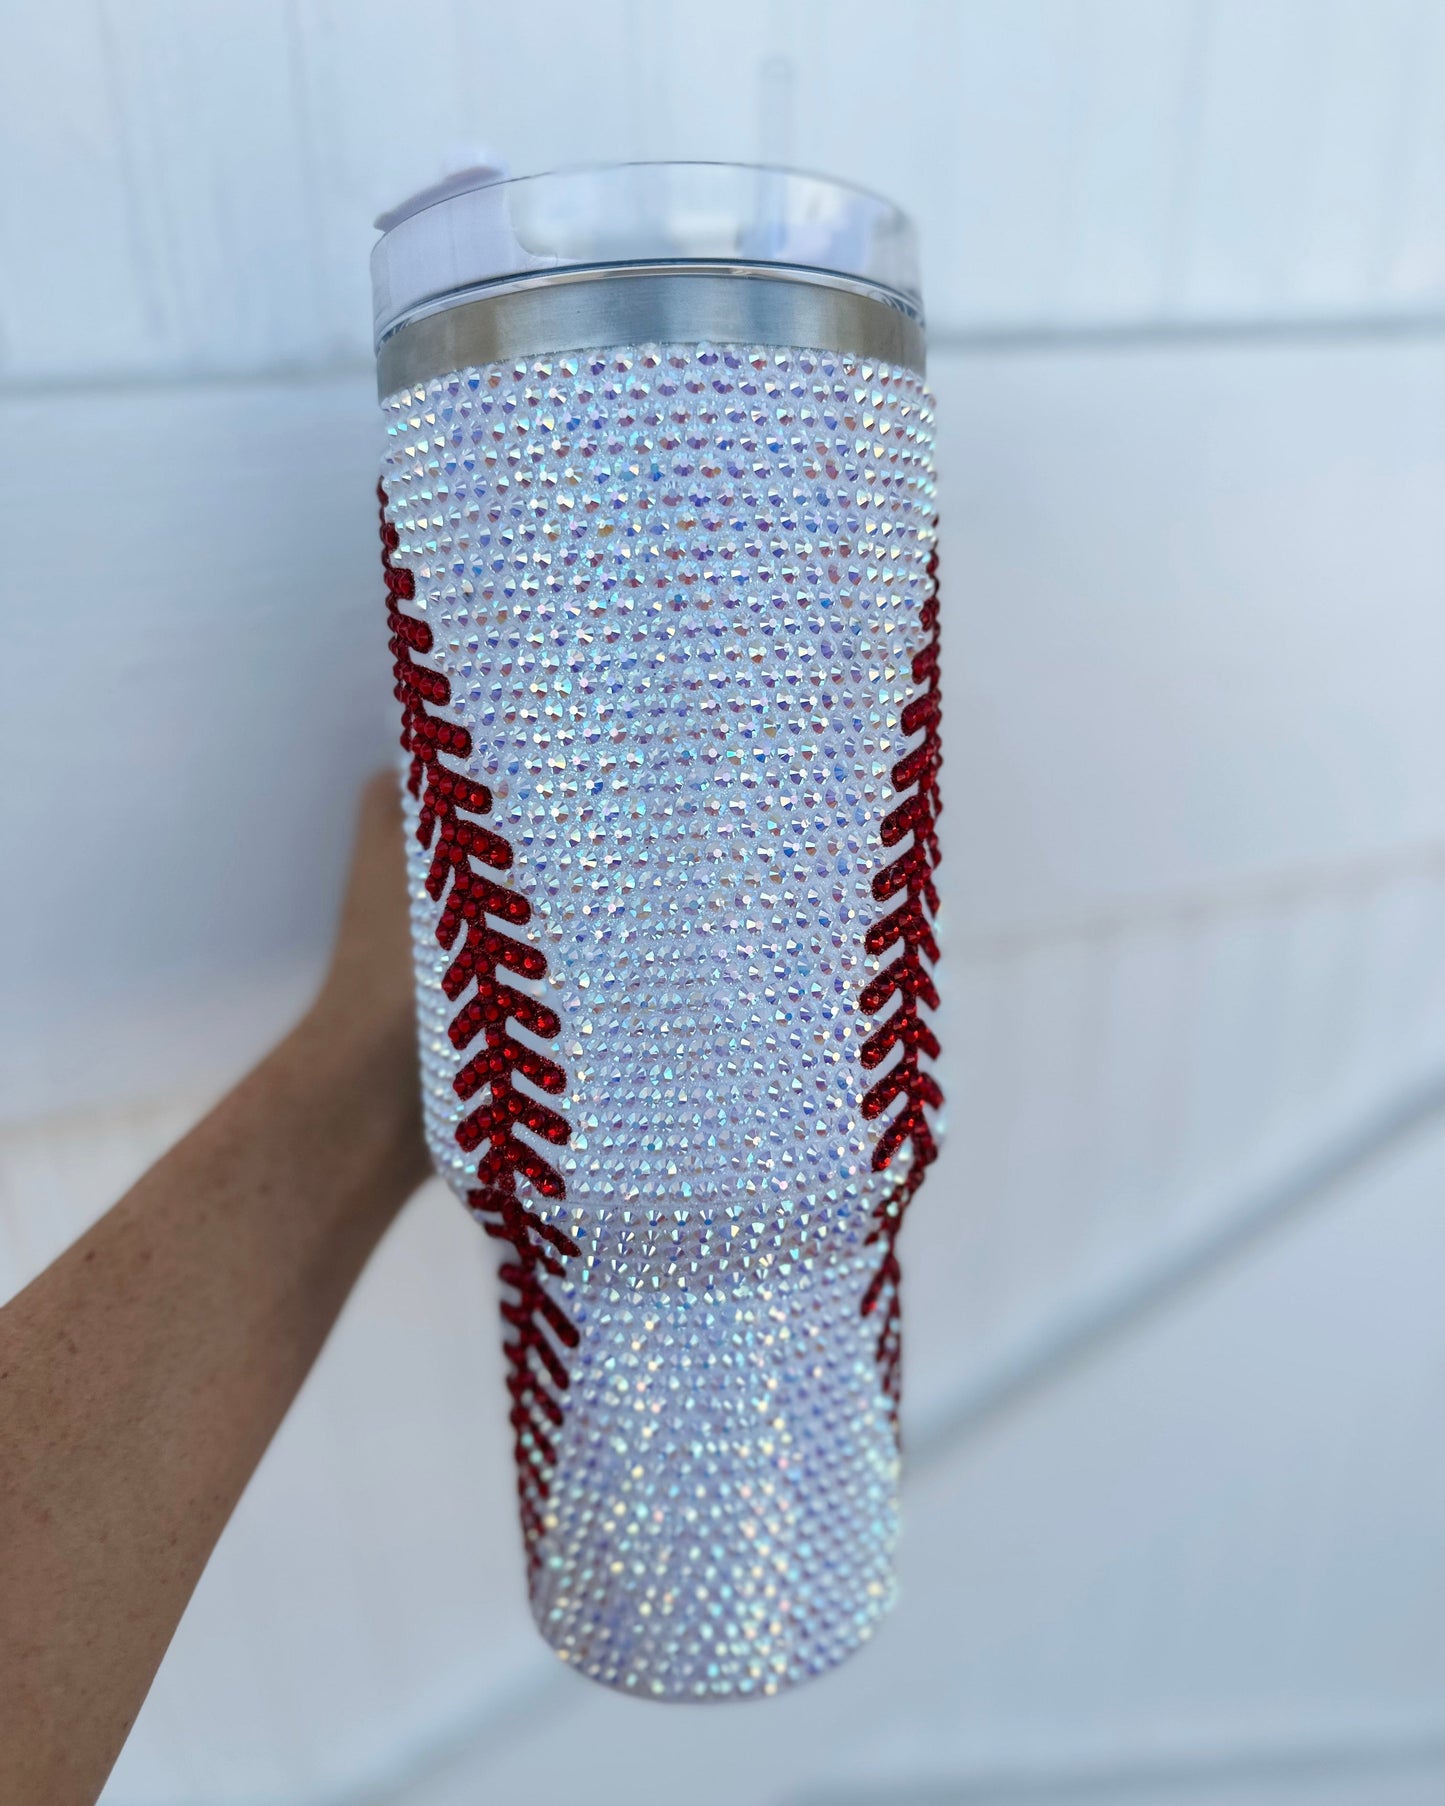 Pre-Order: Crystal Baseball White/Red "Blinged Out" 40 Oz. Tumbler (Ships Approx. 5/30)